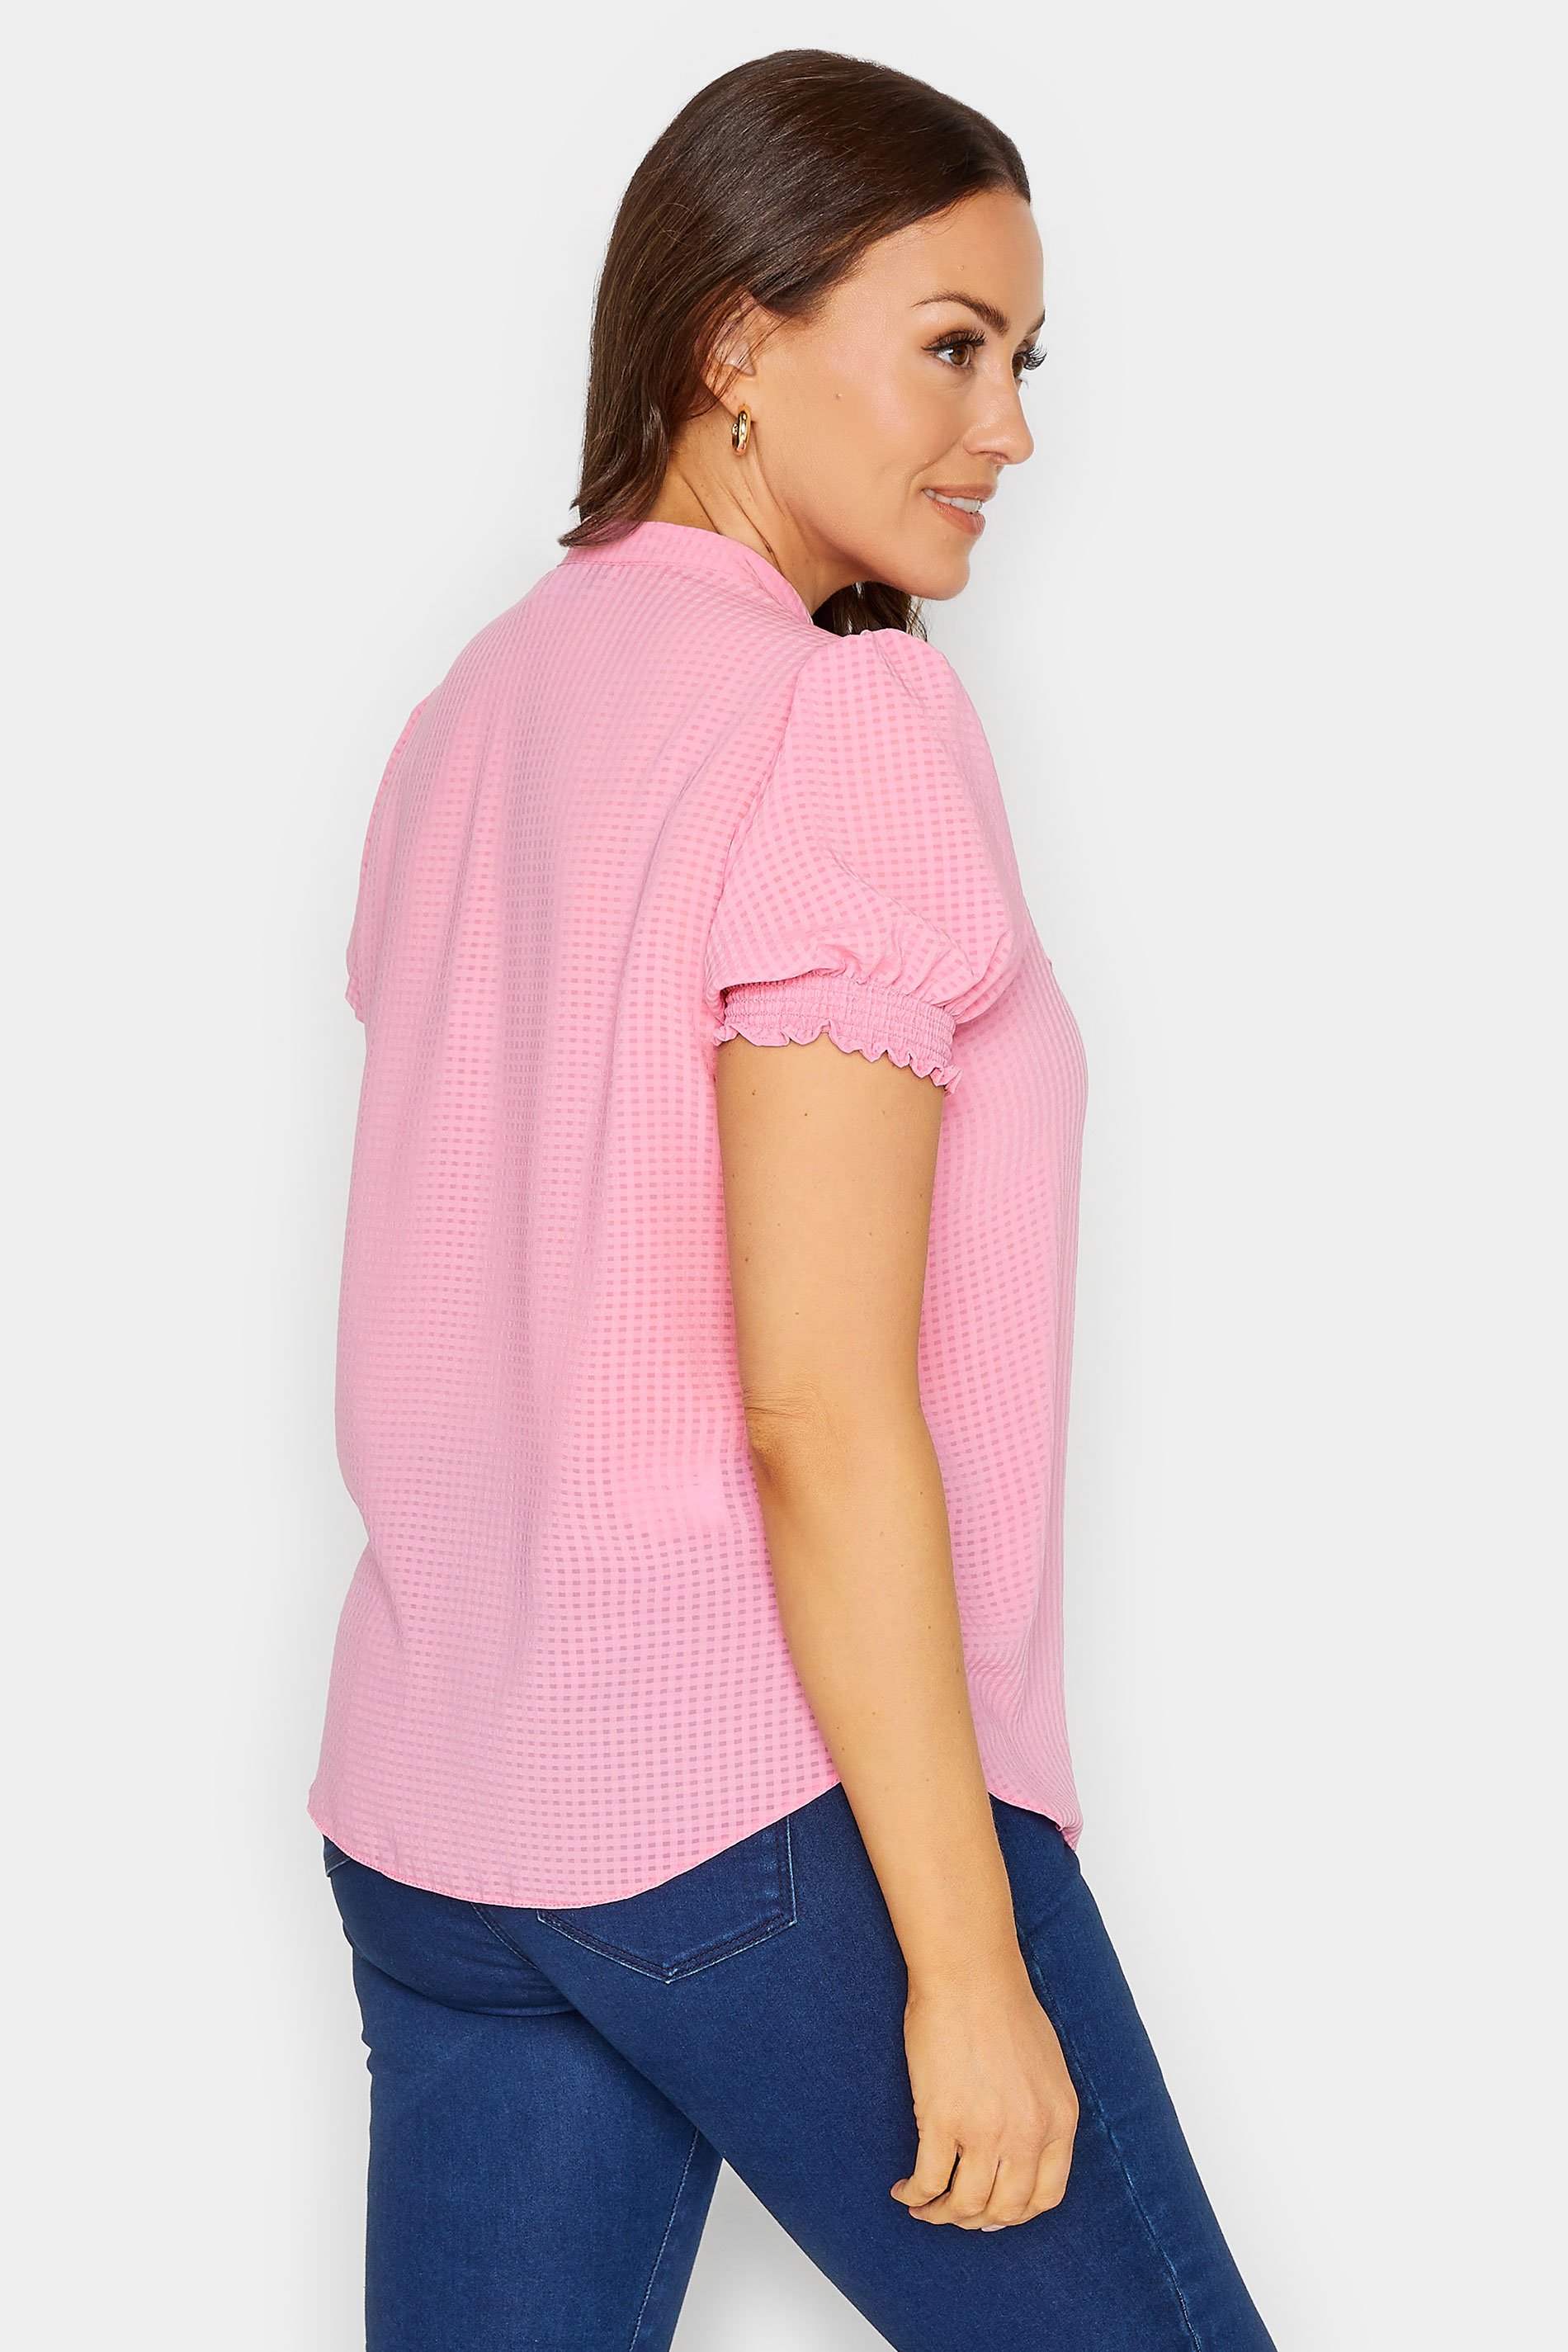 M&Co Pink Check Frill Blouse | M&Co 3